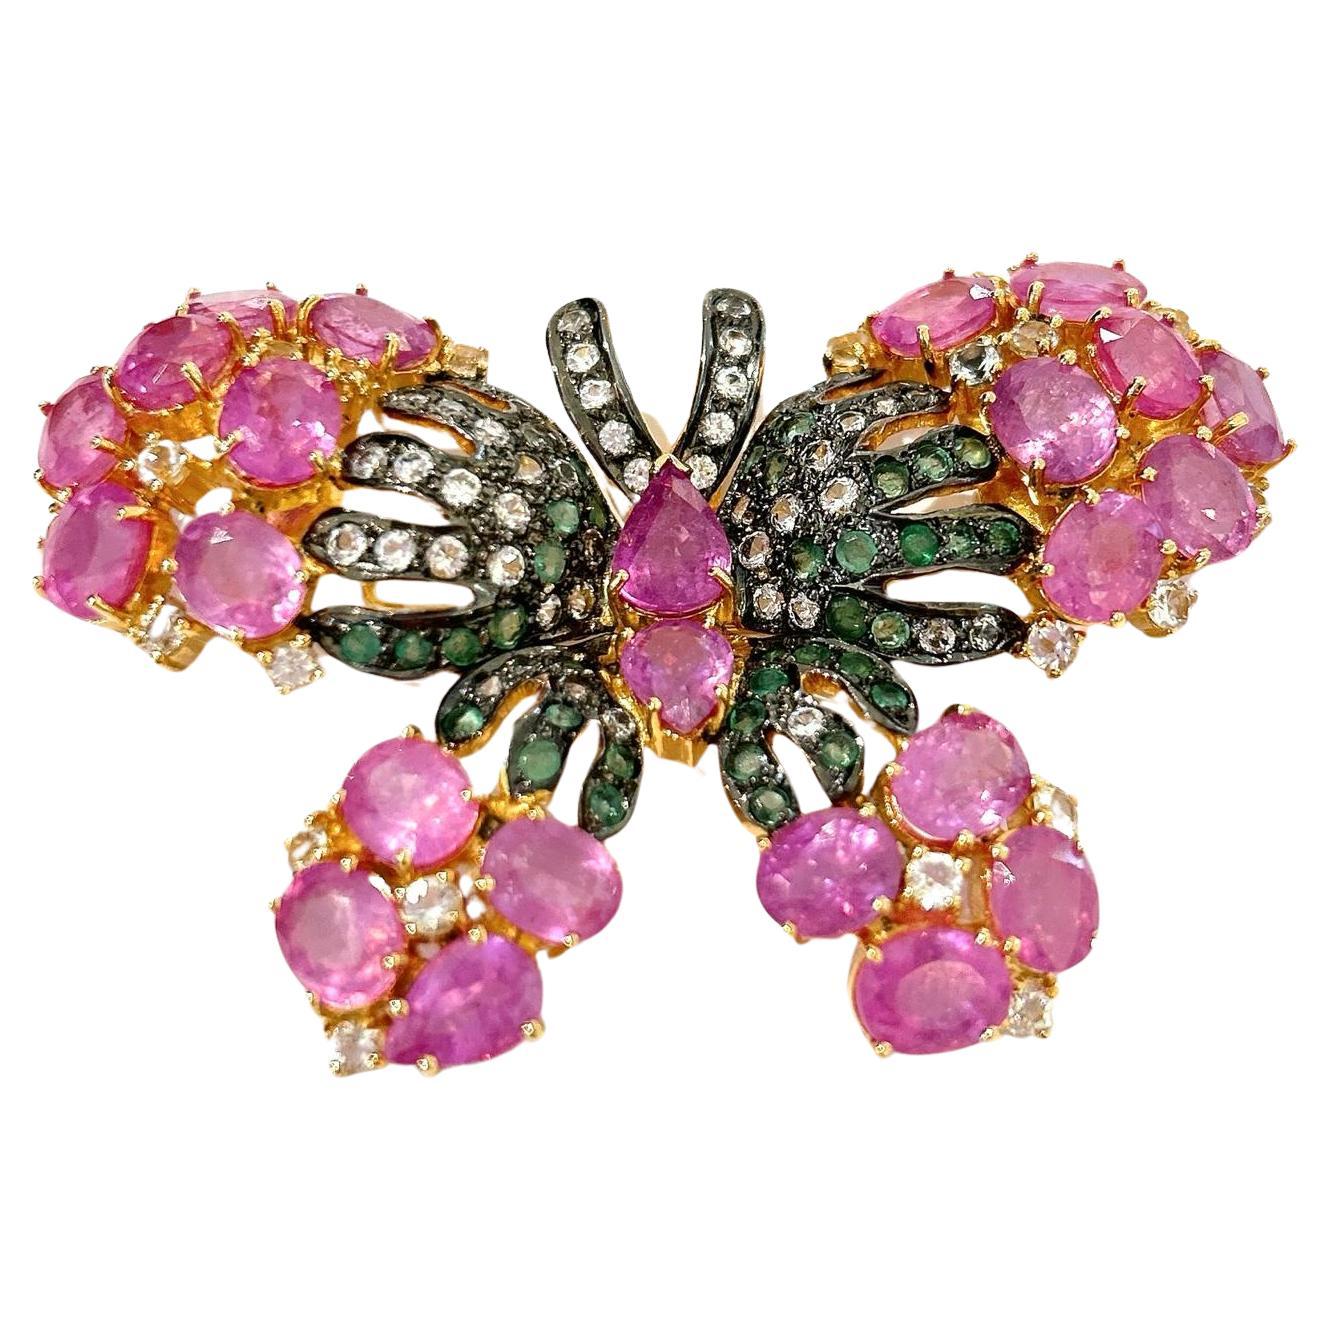 Stunning Bochic “Orient” Multi Sapphires & Ruby Brooch Set In 18K Gold & Silver  For Sale